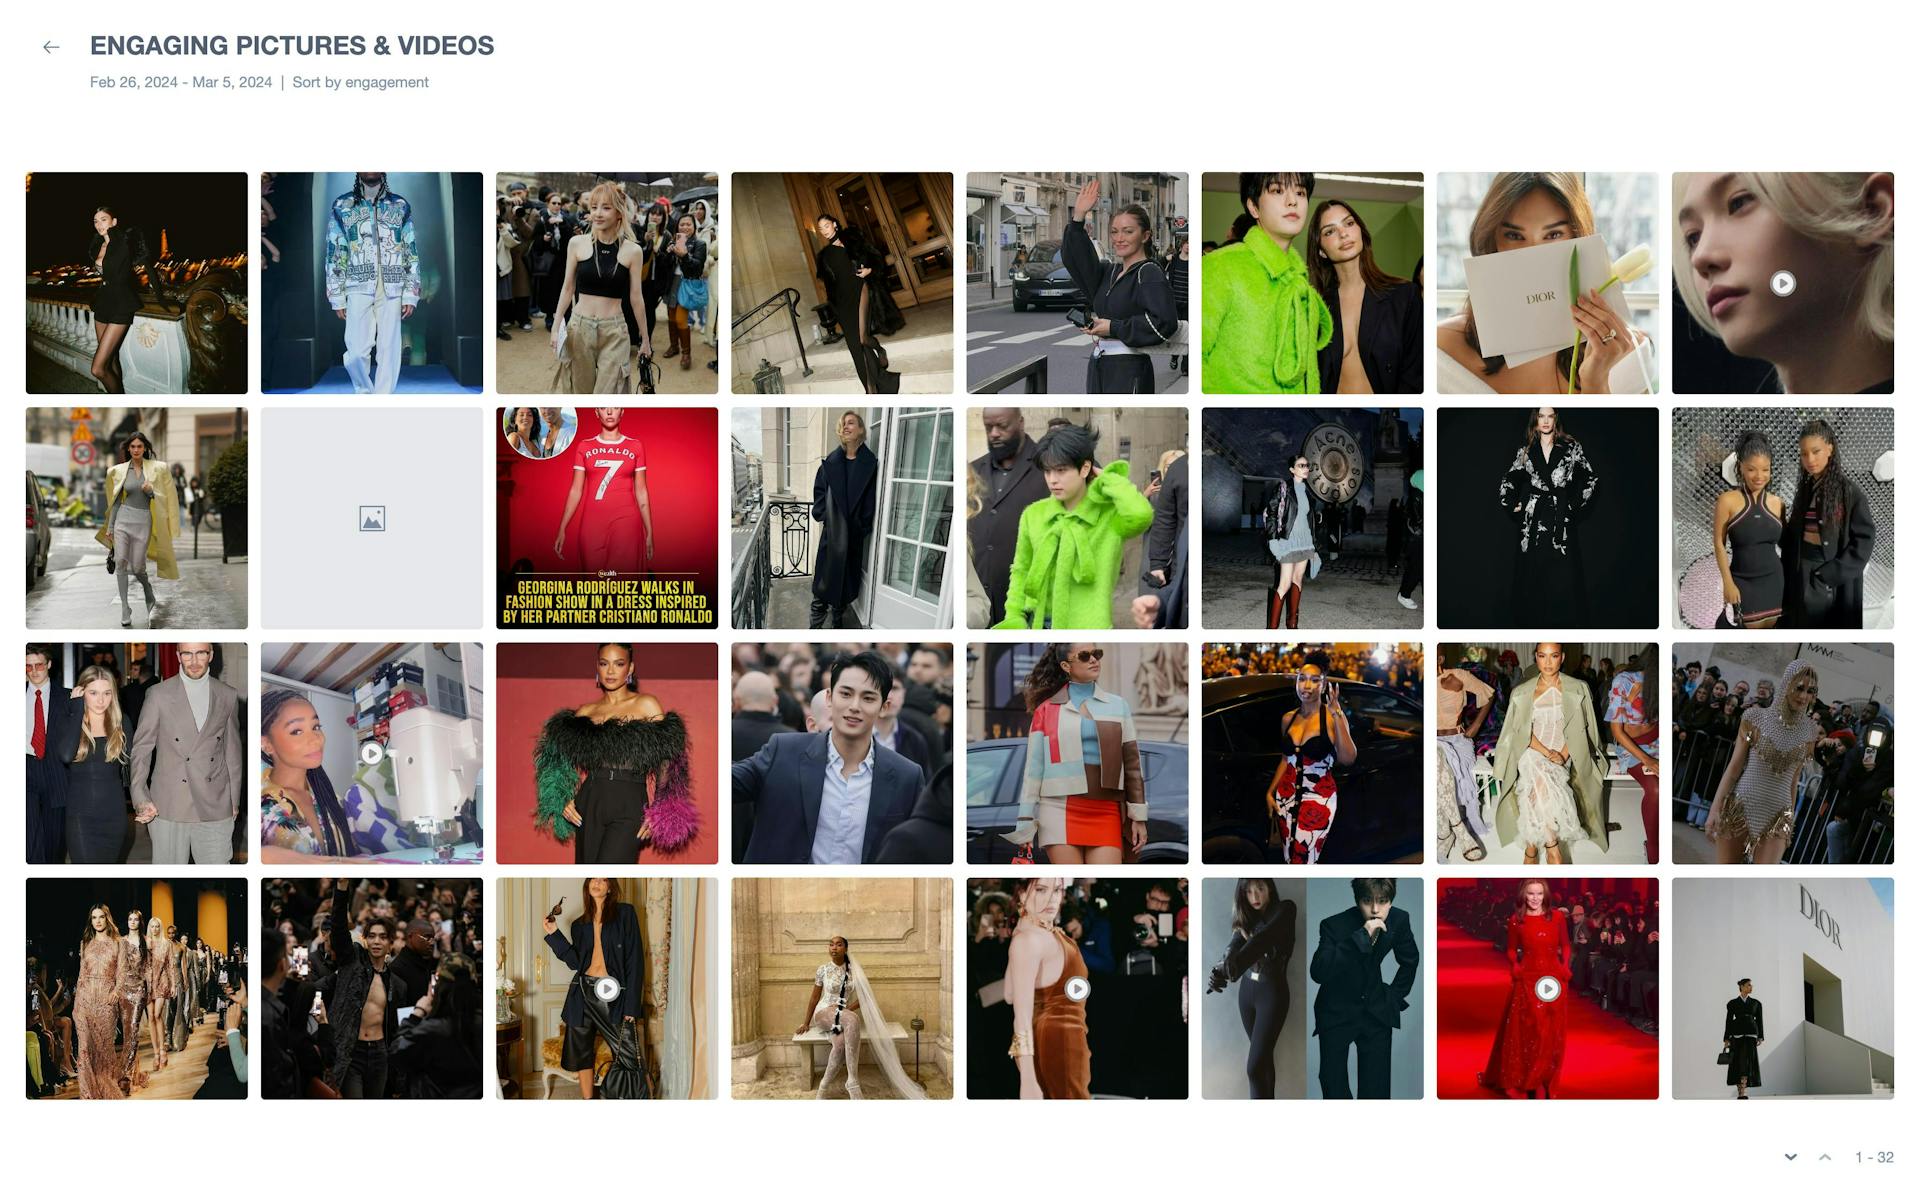 A grid of 32 images showing the most engaging pictures and videos from Paris Fashion Week.